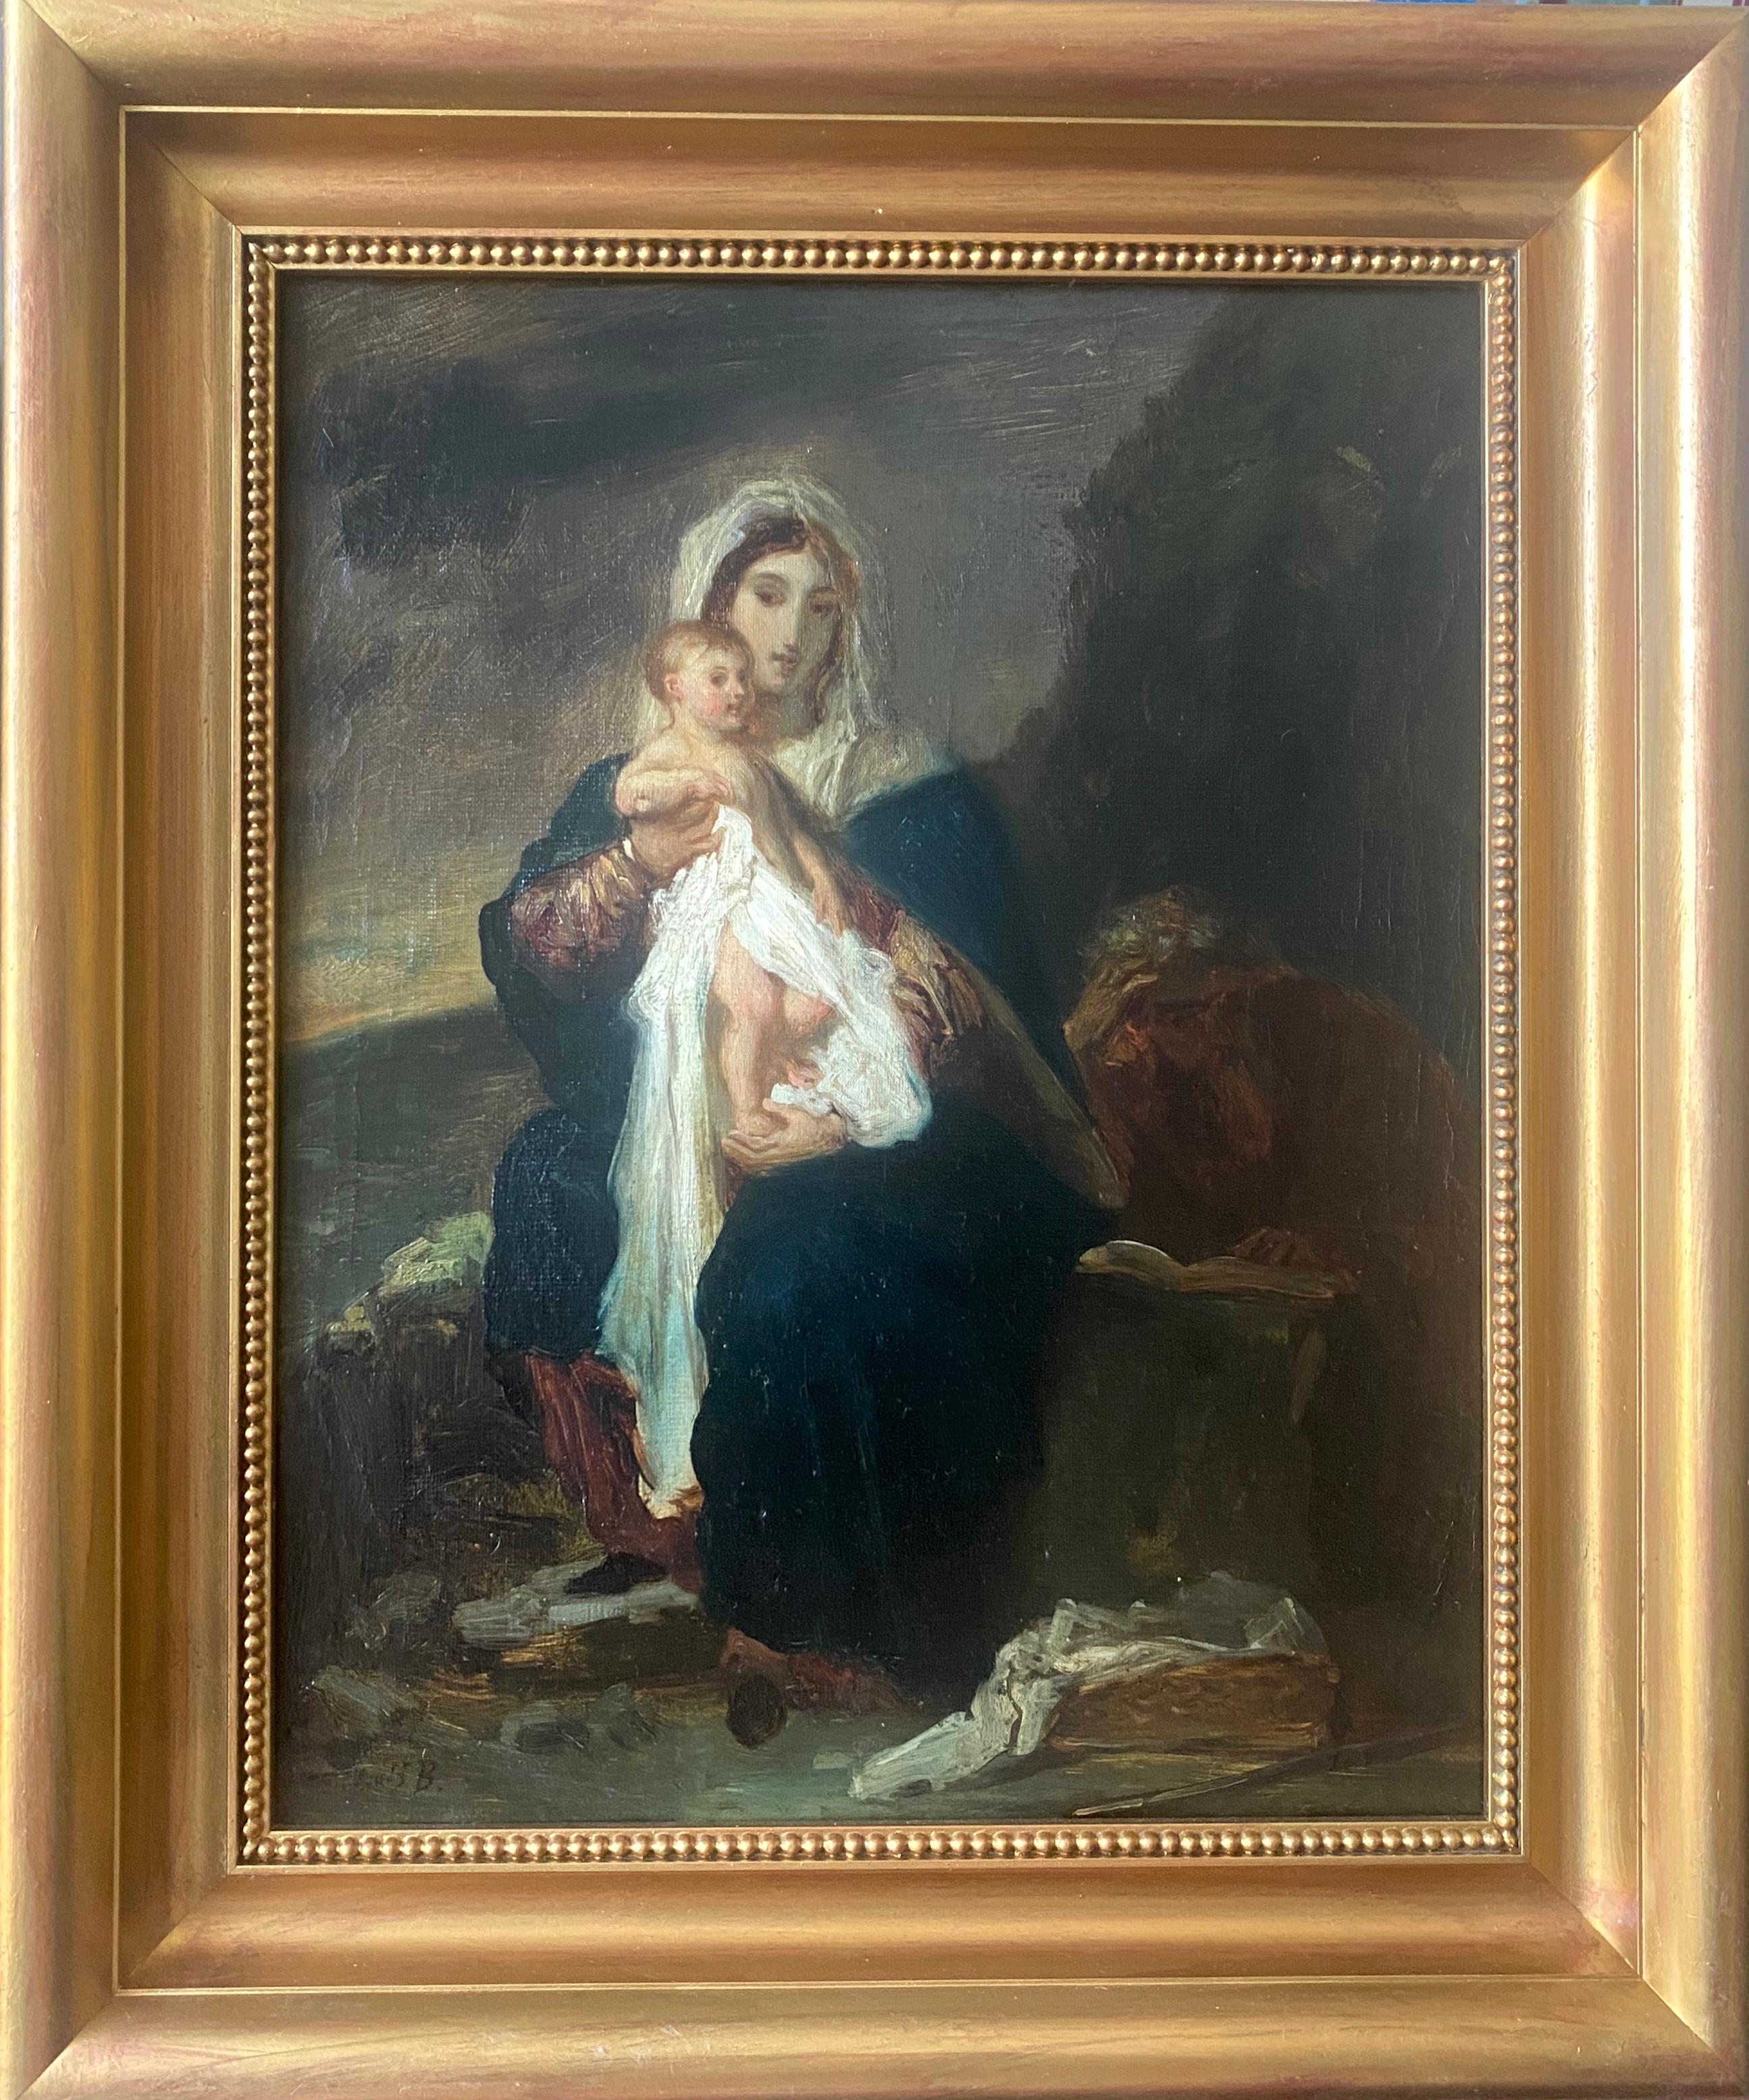 Eugene Delacroix Figurative Painting - Circle of Delacroix: Mother and Child, Madonna by the Water